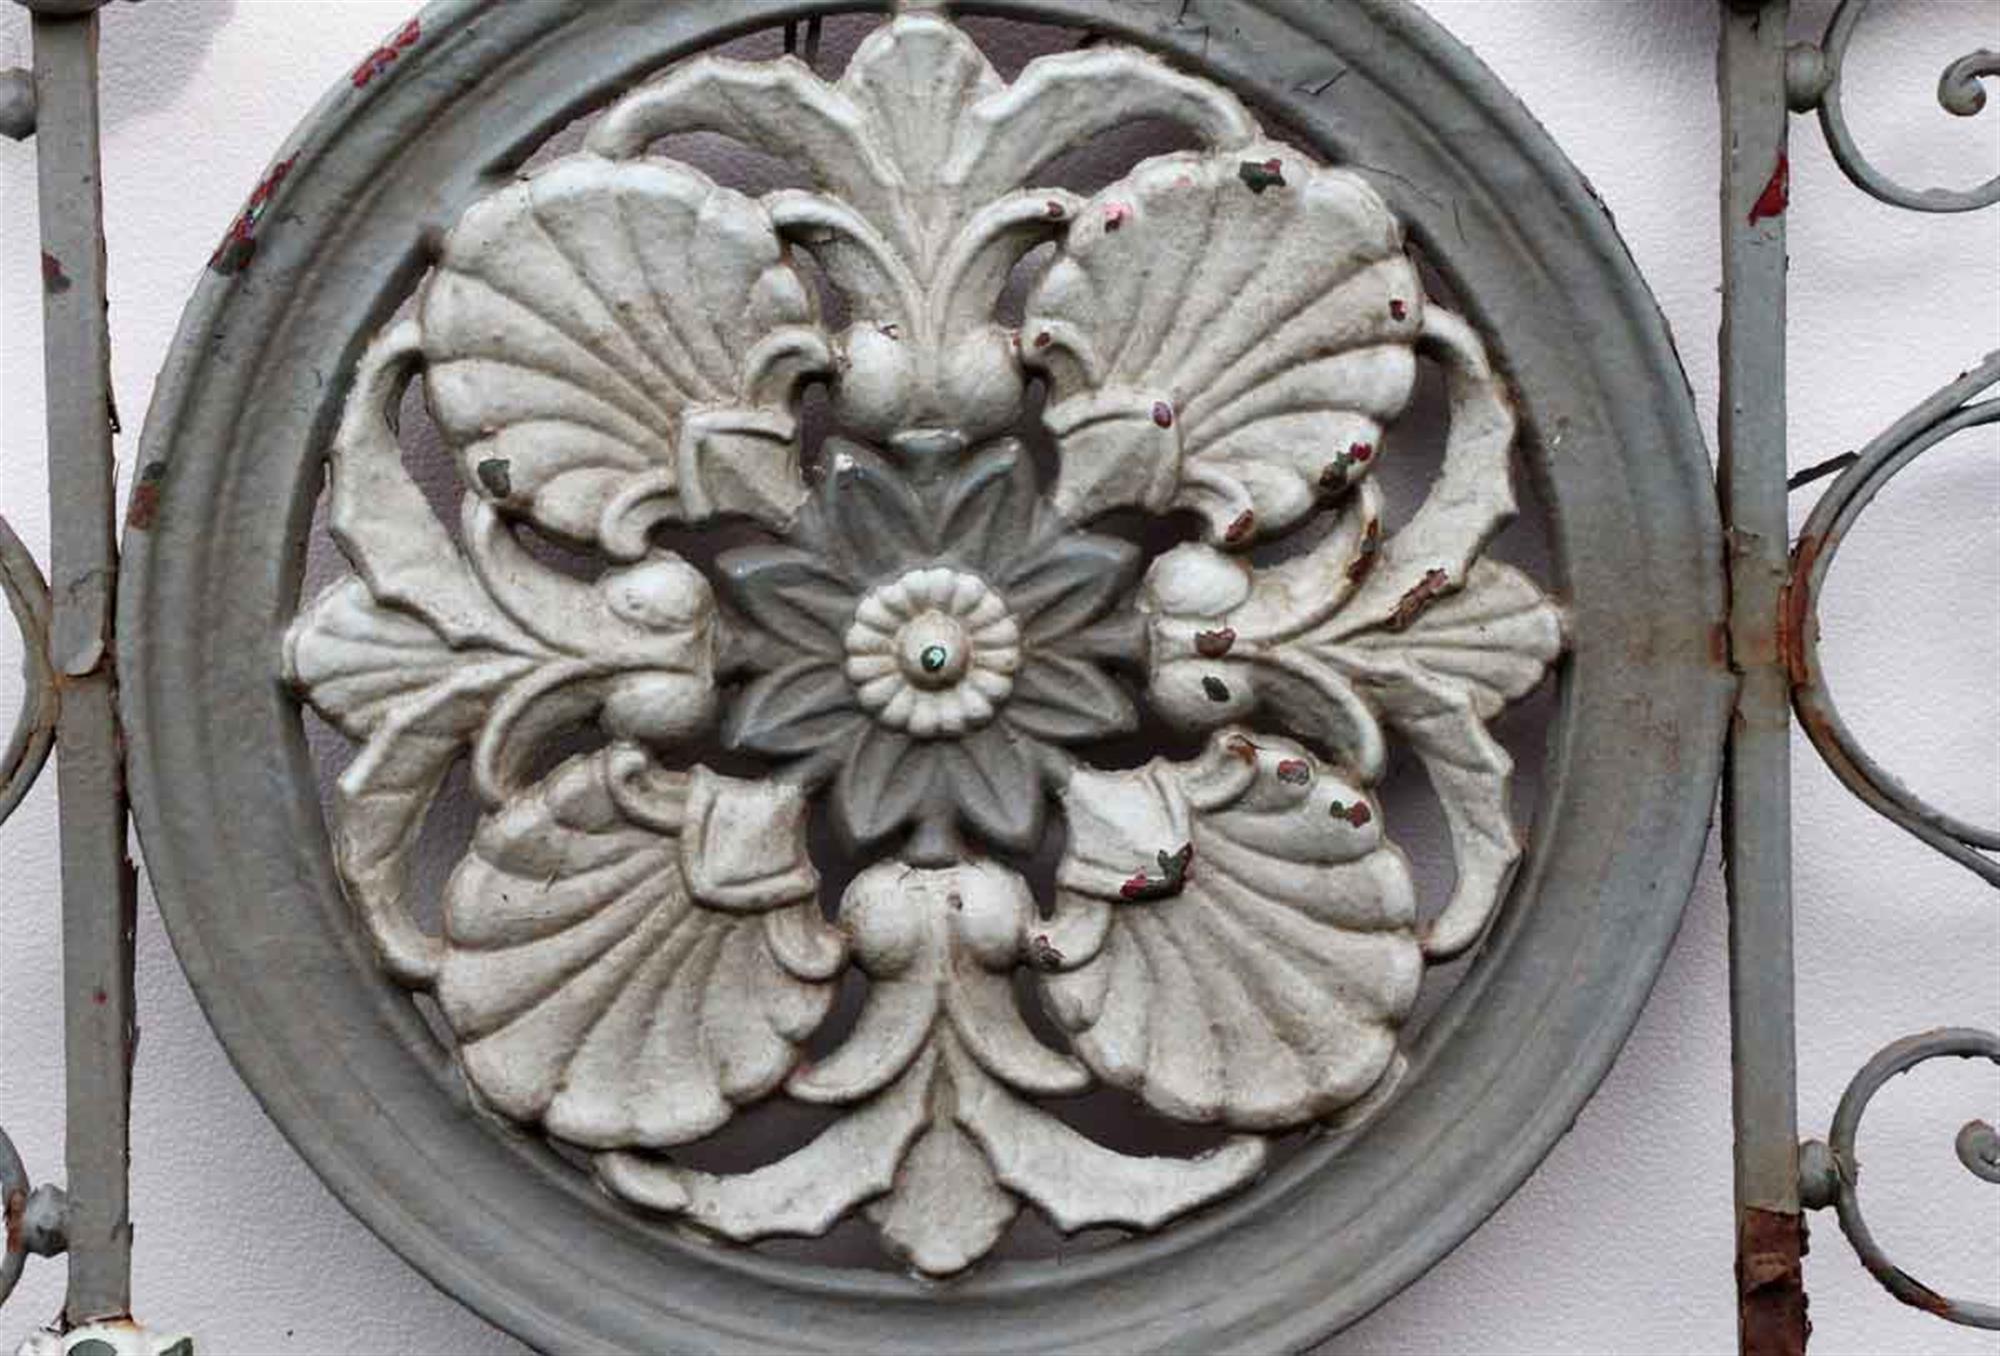 Gray and white iron balcony with floral details. Shows wear from age and use. Flower missing on lower right corner. Other minor loses. This can be seen at our 400 Gilligan St location in Scranton, PA.